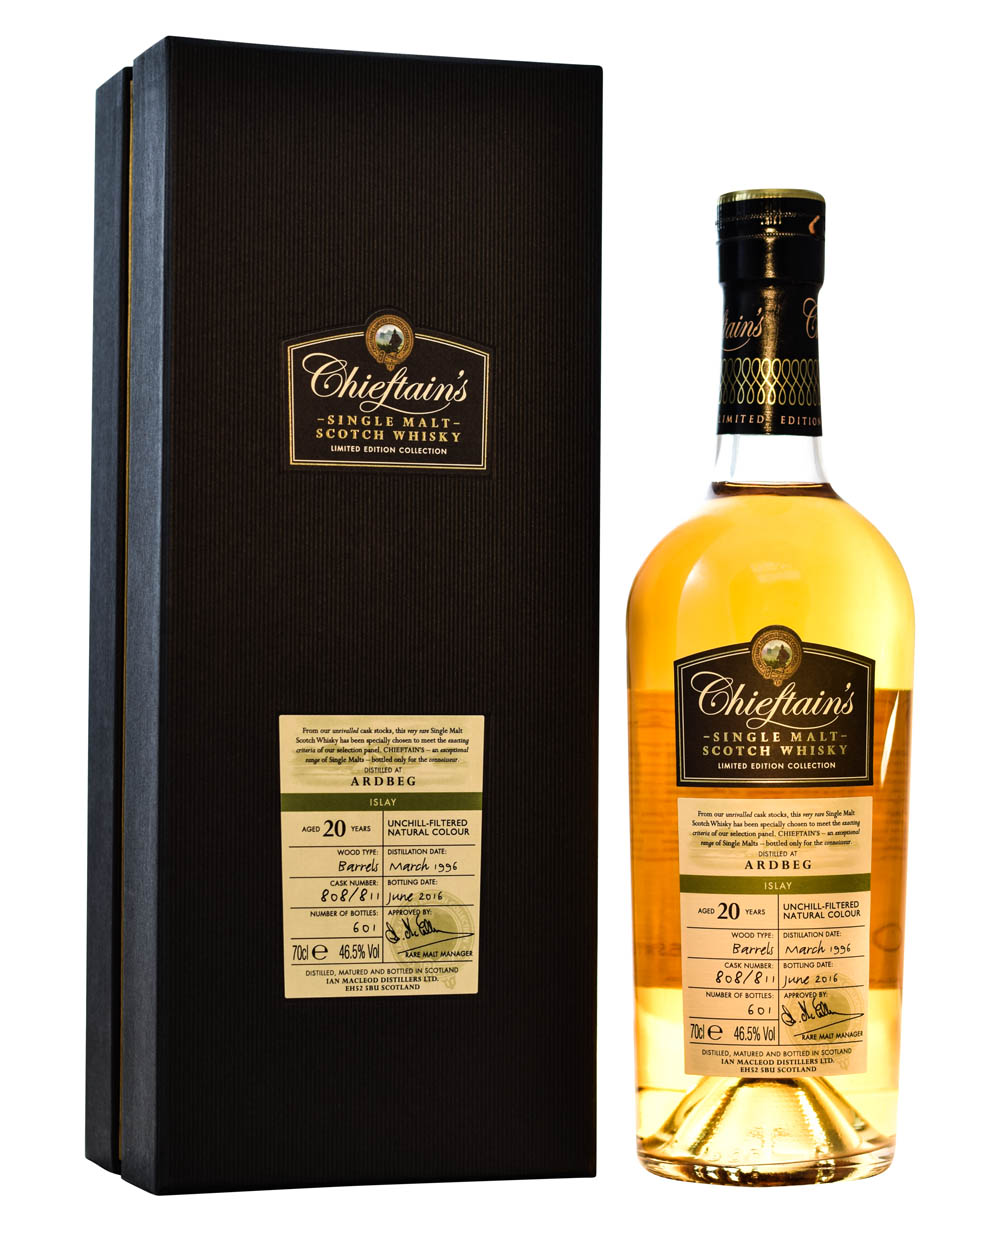 Ardbeg 1996 Chieftain's (20 Years Old) - Box Musthave Malts MHM